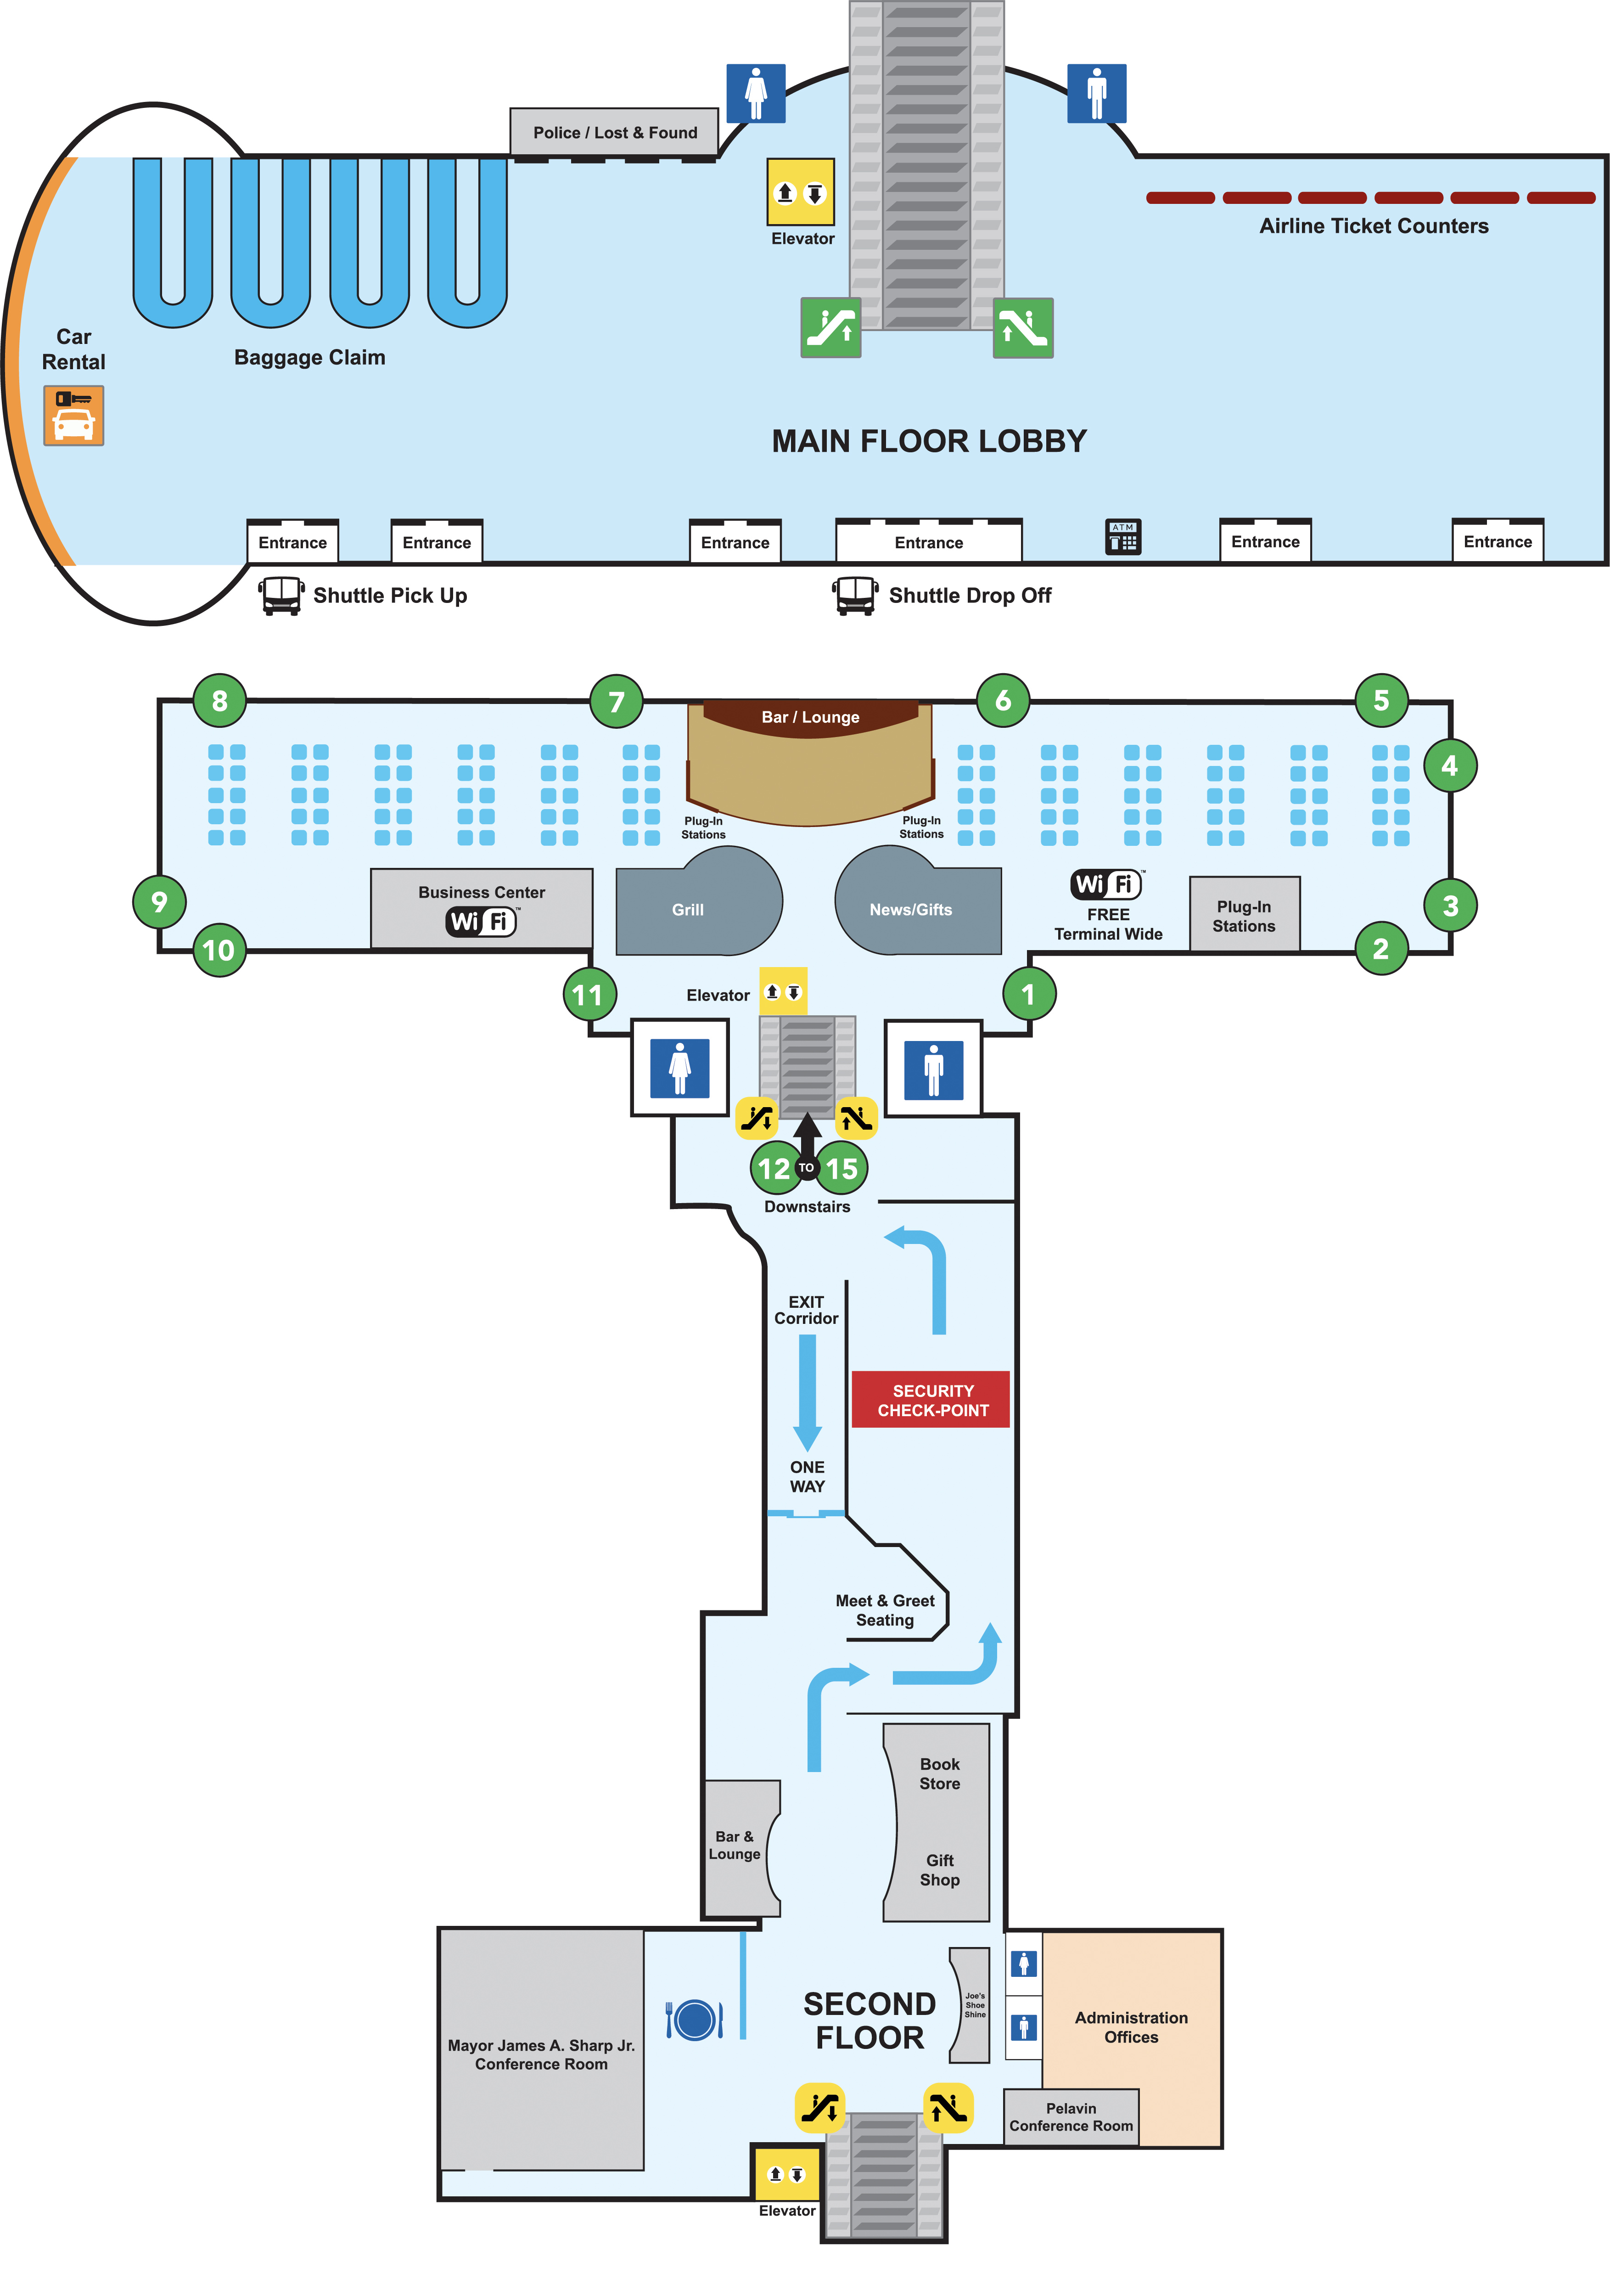 Top image: Main floor lobby. From left to right. On the left, Car rental booths. The back left wall, the  Baggage claim area with 4 areas. Back wall left of the escalator is the Police, Lost and found office. Next to the is the woman's restroom and elevator. On the other side of the escalator is the men's restroom. On the back right wall is the Airline ticket counters. There are 6 entrances in the front with the shuttle pick up on the left and the shuttle drop off in the middle of the airport.          Bottom image: This is the second floor. At the top of the image are 12 terminal doors with a bar and lounge in the middle. There is a business center with free wi-fi, a grill, news and gift shop, free terminal wide, and plugin stations. In the middle are the escalators with the woman's restroom to the left and men's room to the right. Security checkpoint is in the middle along with meet and greet seating. There is a bar and lounge, book store, and giftshop there as well. At the bottom of the image is the conference room, another restaurant, admin offices and a second set of stairs and elevator.